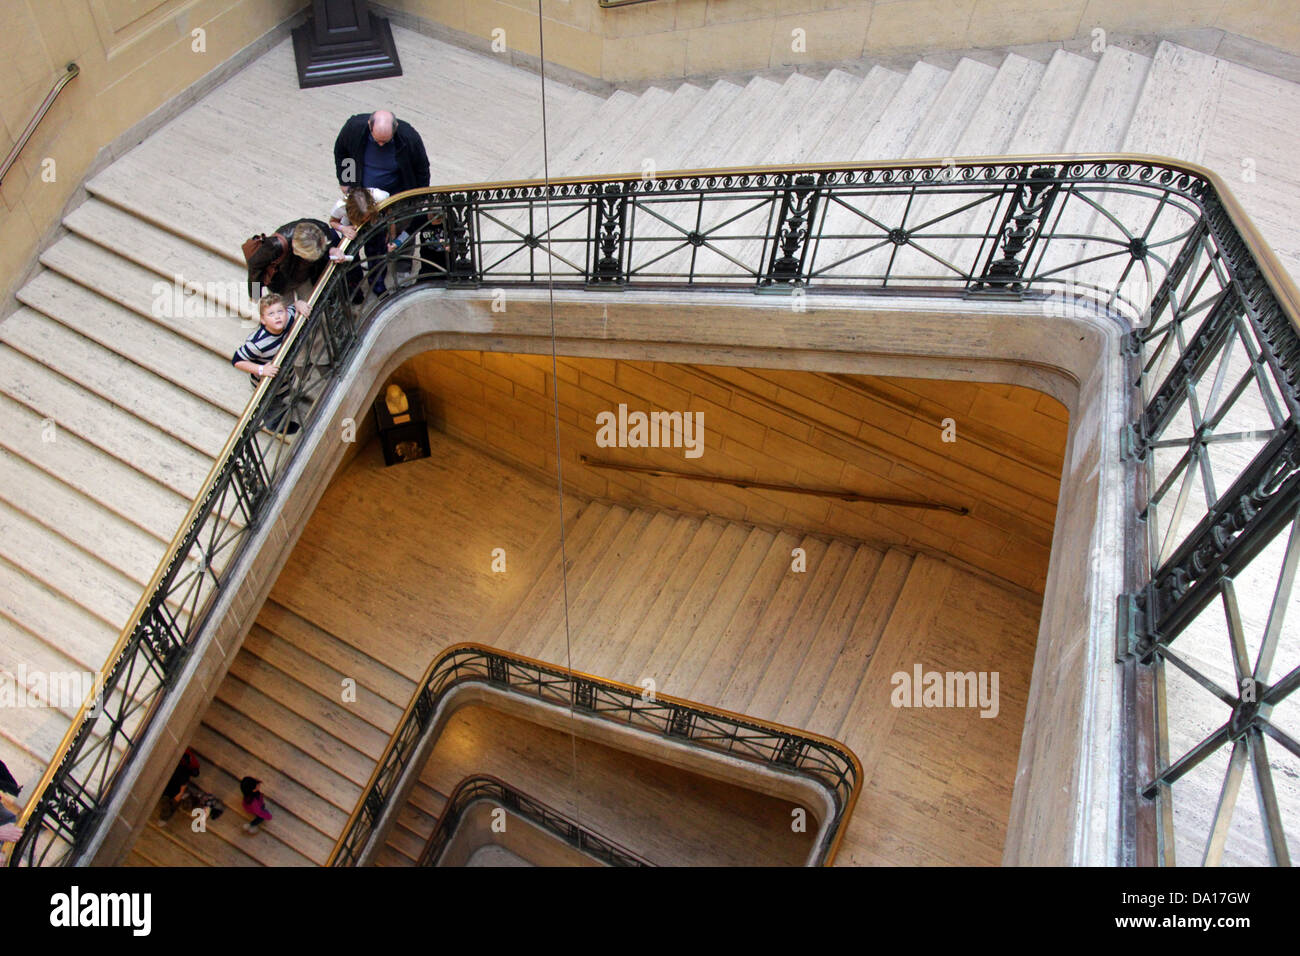 Interior stairs at the Franklin Institute of Philadelphia, Pennsylvania, where the pendulum is located and a family it watching. Stock Photo